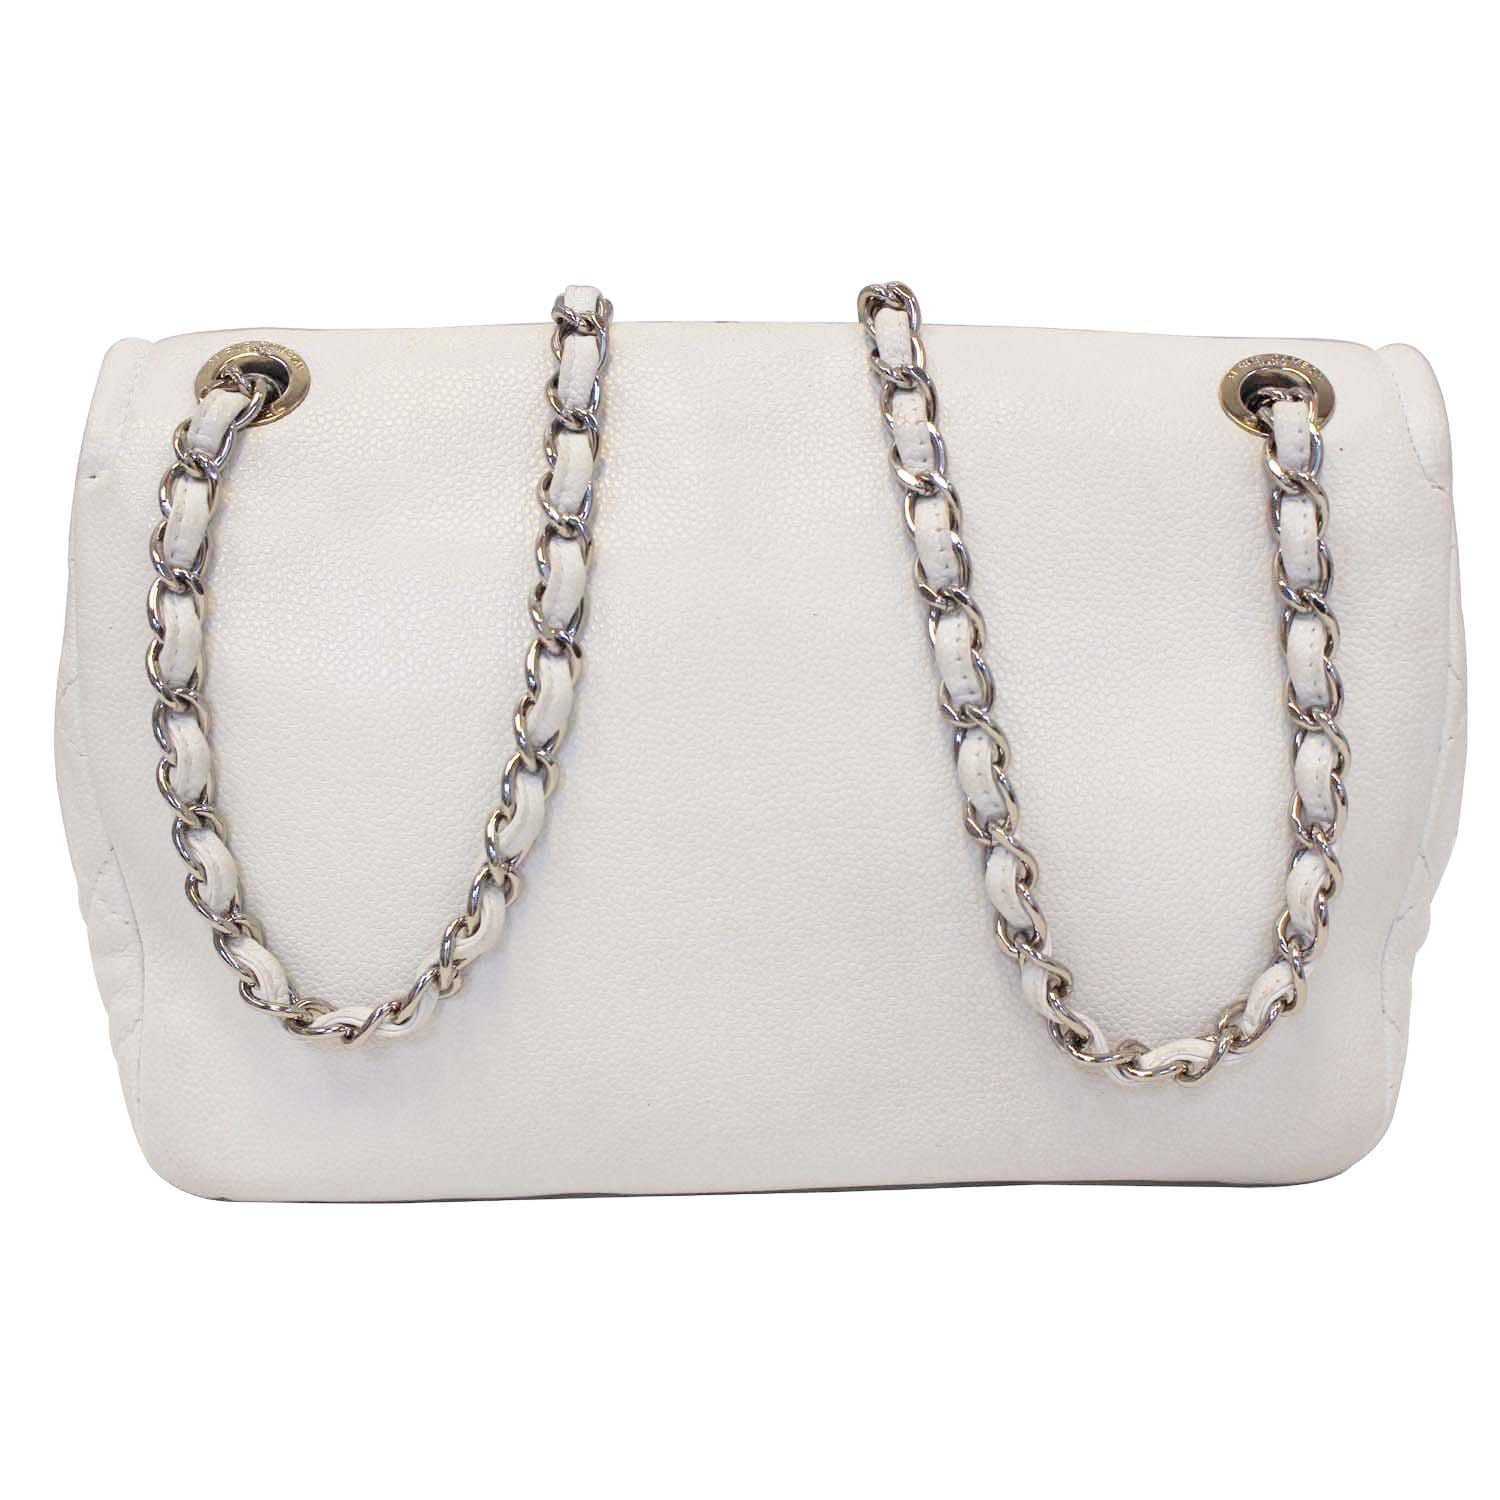 CHANEL Classic Flap White Bags & Handbags for Women for sale